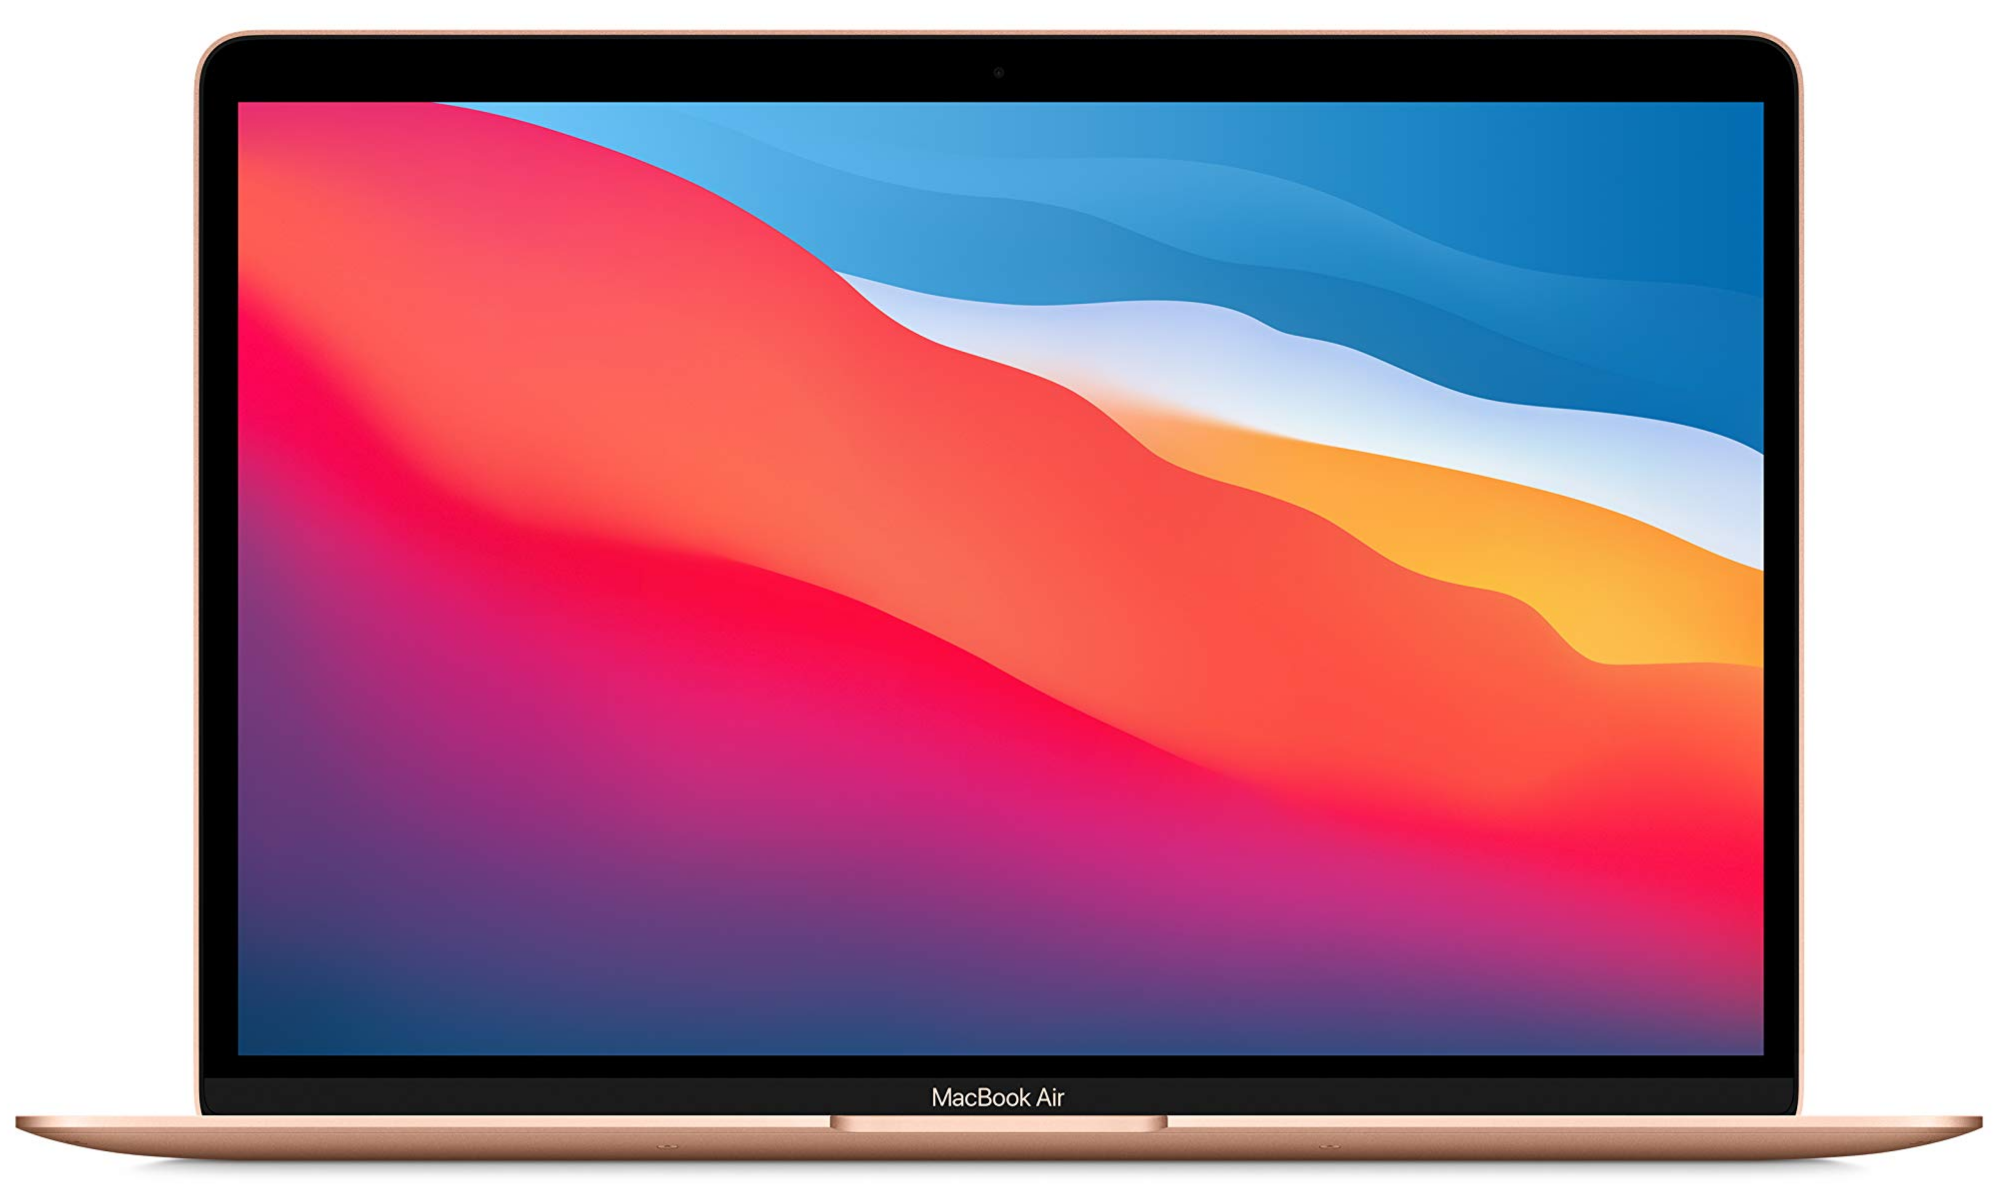 Apple 2020 MacBook Air Laptop M1 Chip, 13” Retina Display, 8GB RAM, 256GB SSD Storage, Backlit Keyboard, FaceTime HD Camera, Touch ID. Works with iPhone/iPad; Gold - $749.99